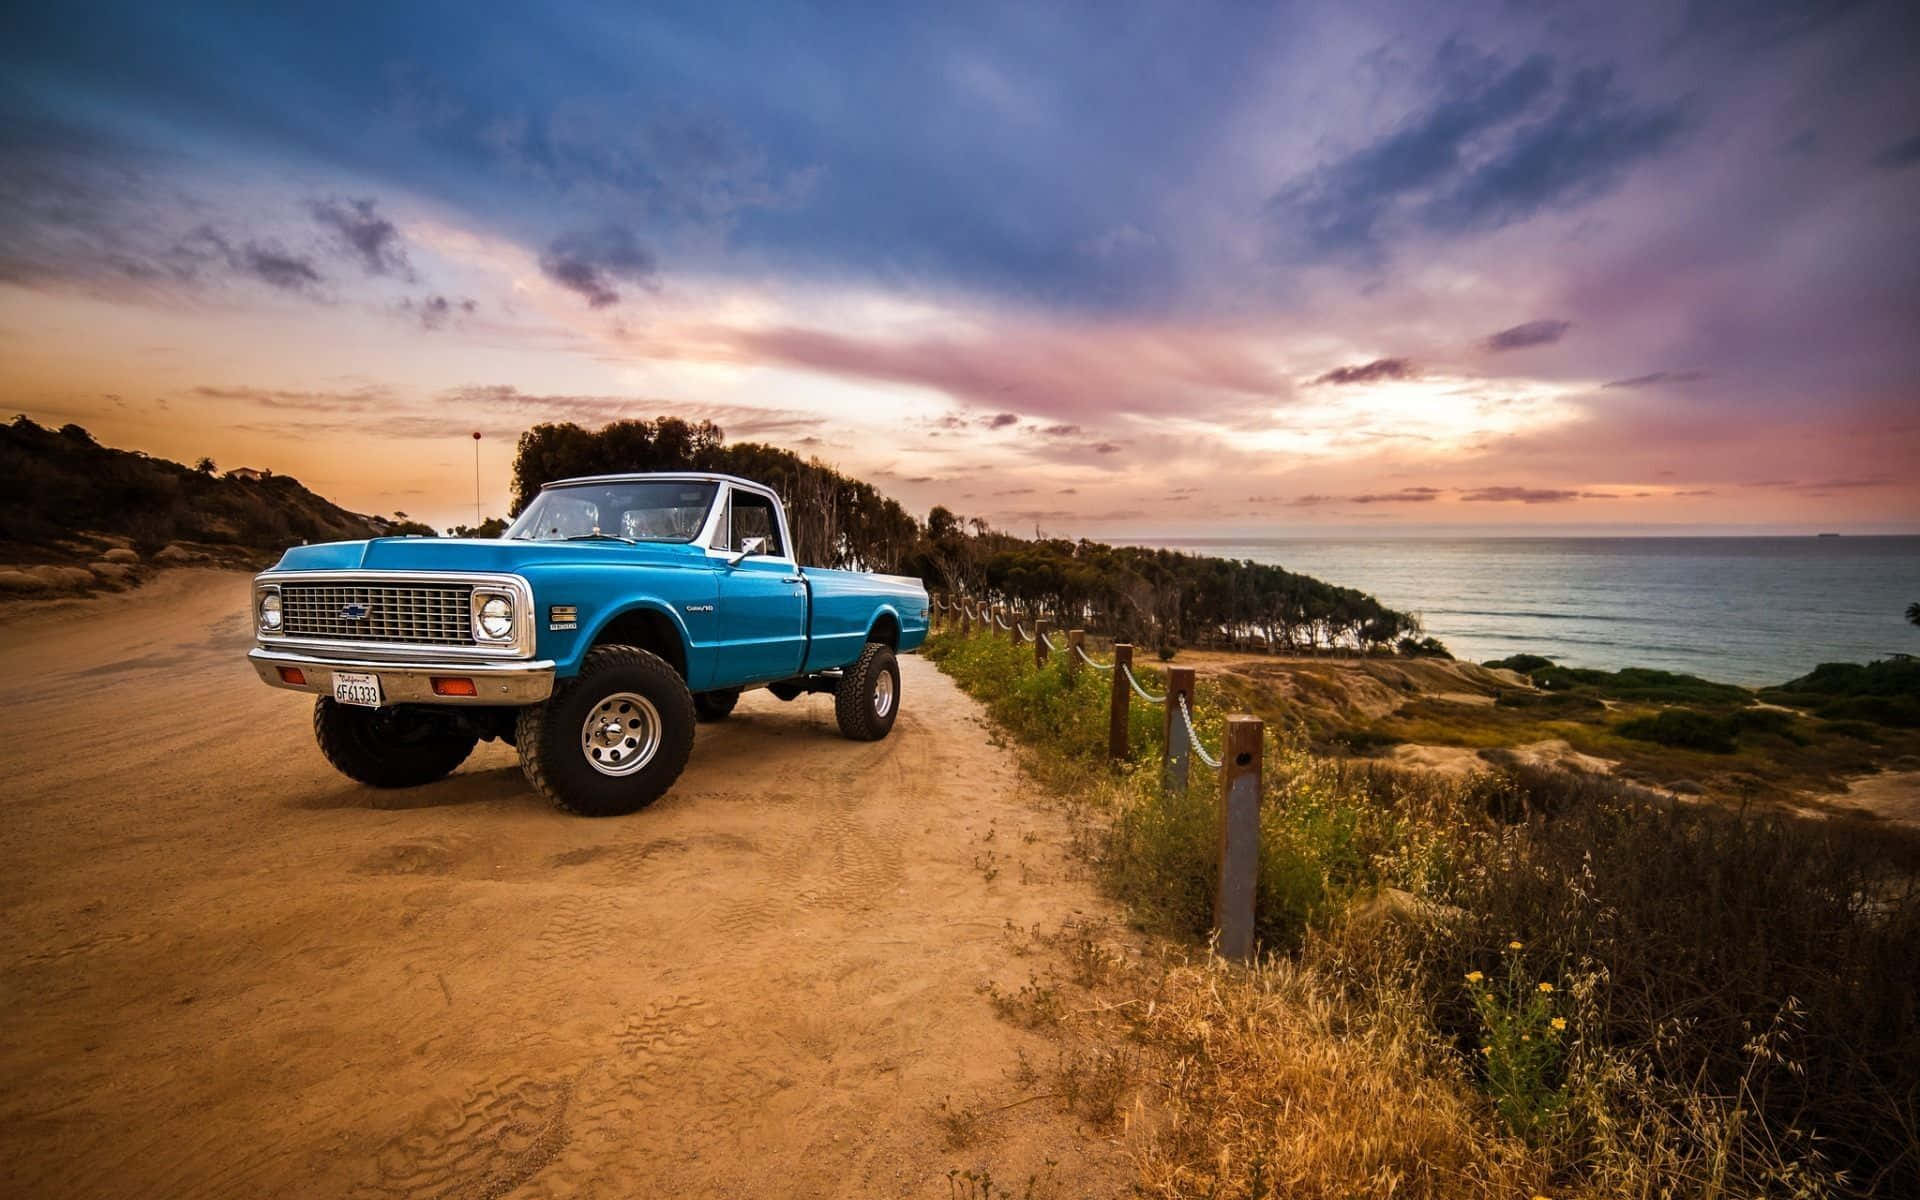 A Blue Truck Is Parked On A Dirt Road Near The Ocean Background